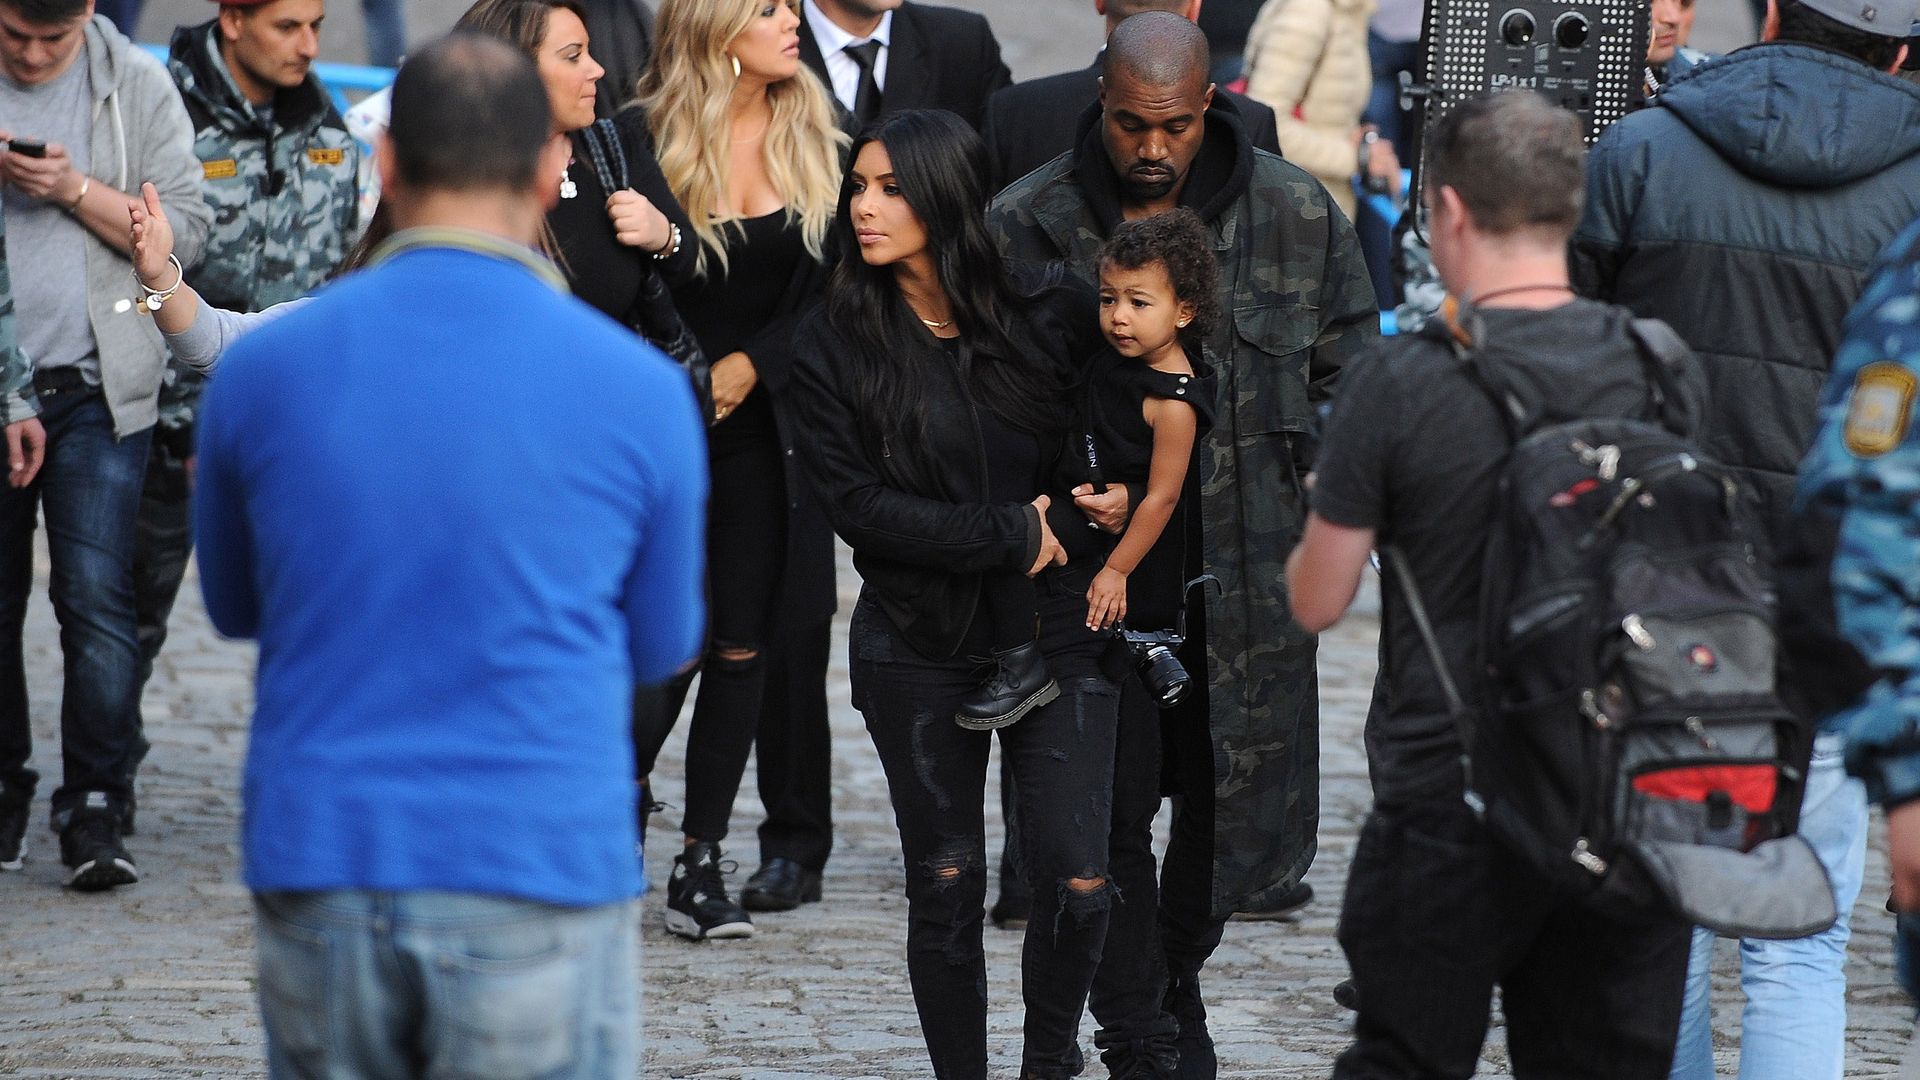 Kim Kardashian carrying her child with Kanye West behind her